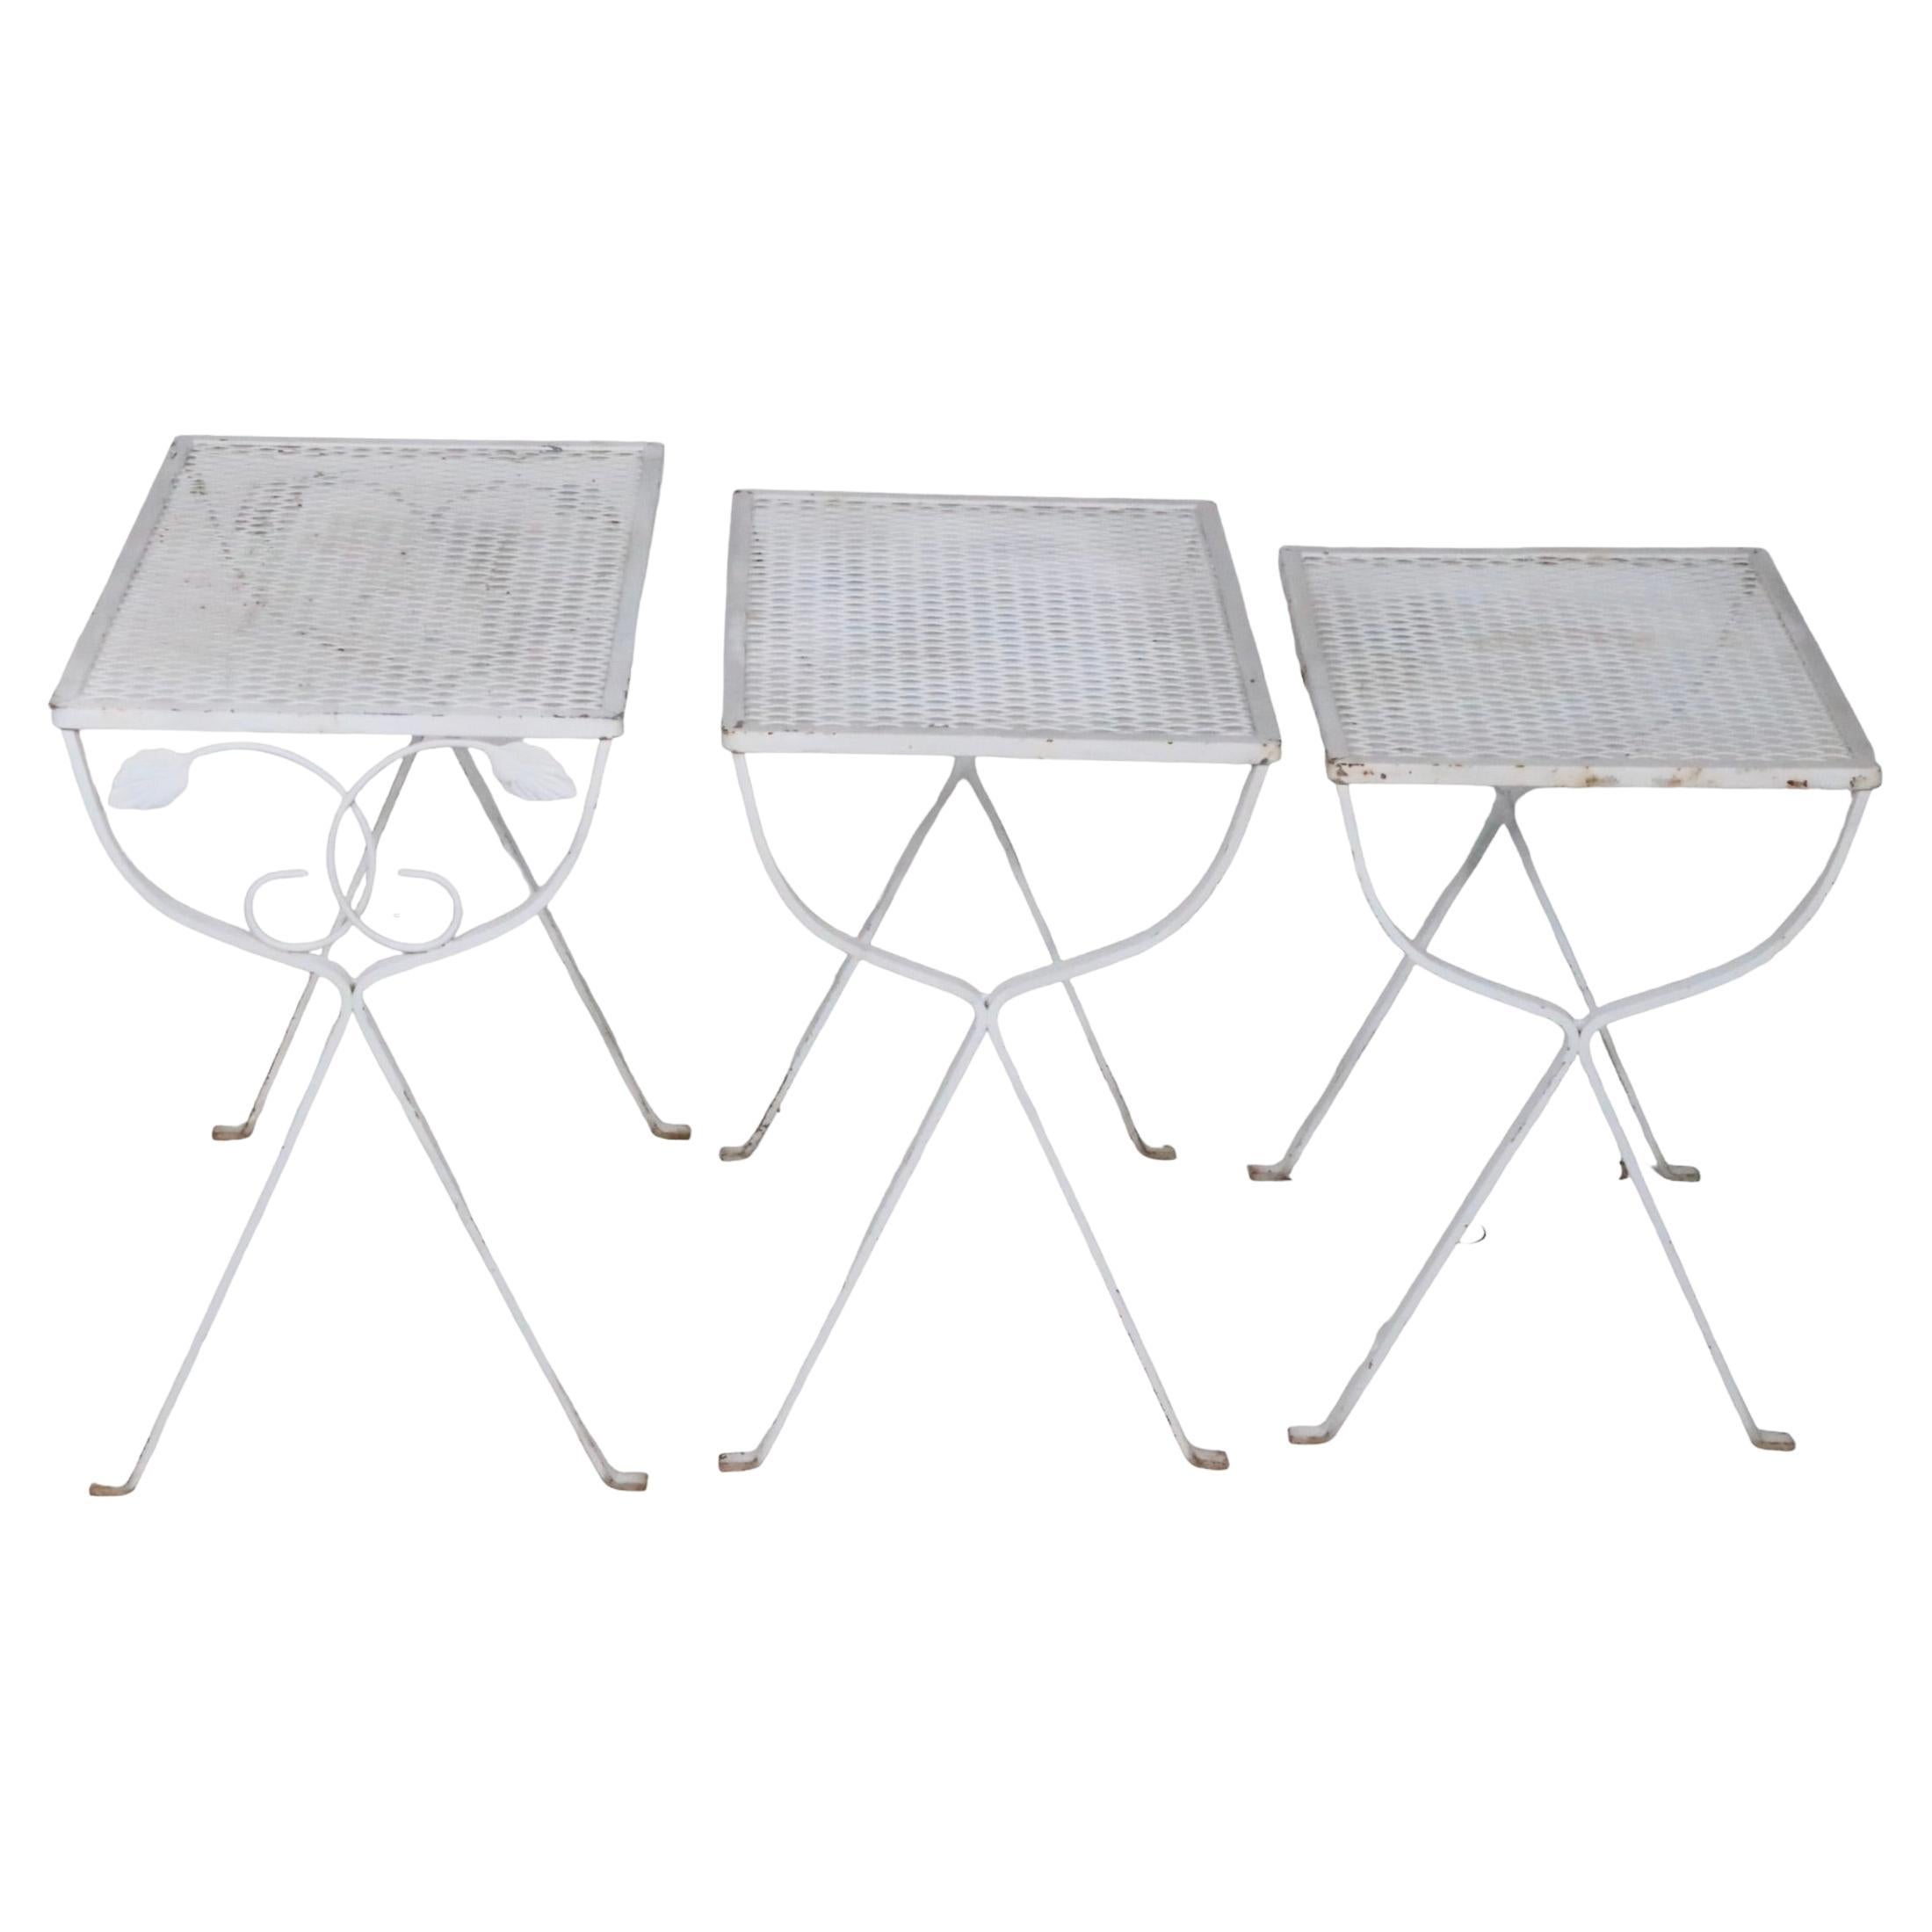 Set of Three Vintage  Wrought Iron and Metal Mesh Garden Patio  Nesting Tables  For Sale